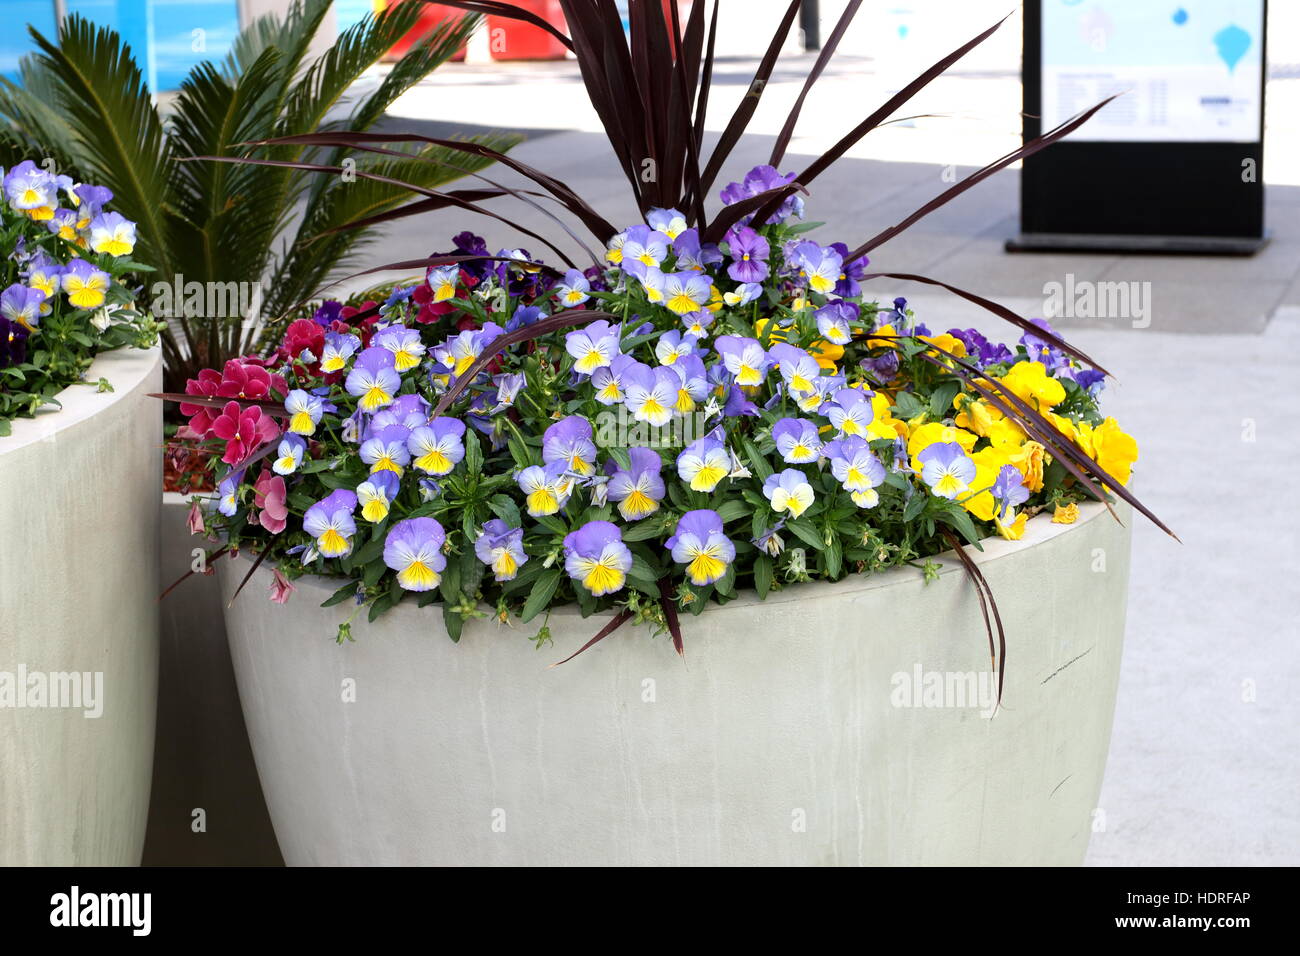 Mixed color blooming pansies and violas growing in a  pot Stock Photo